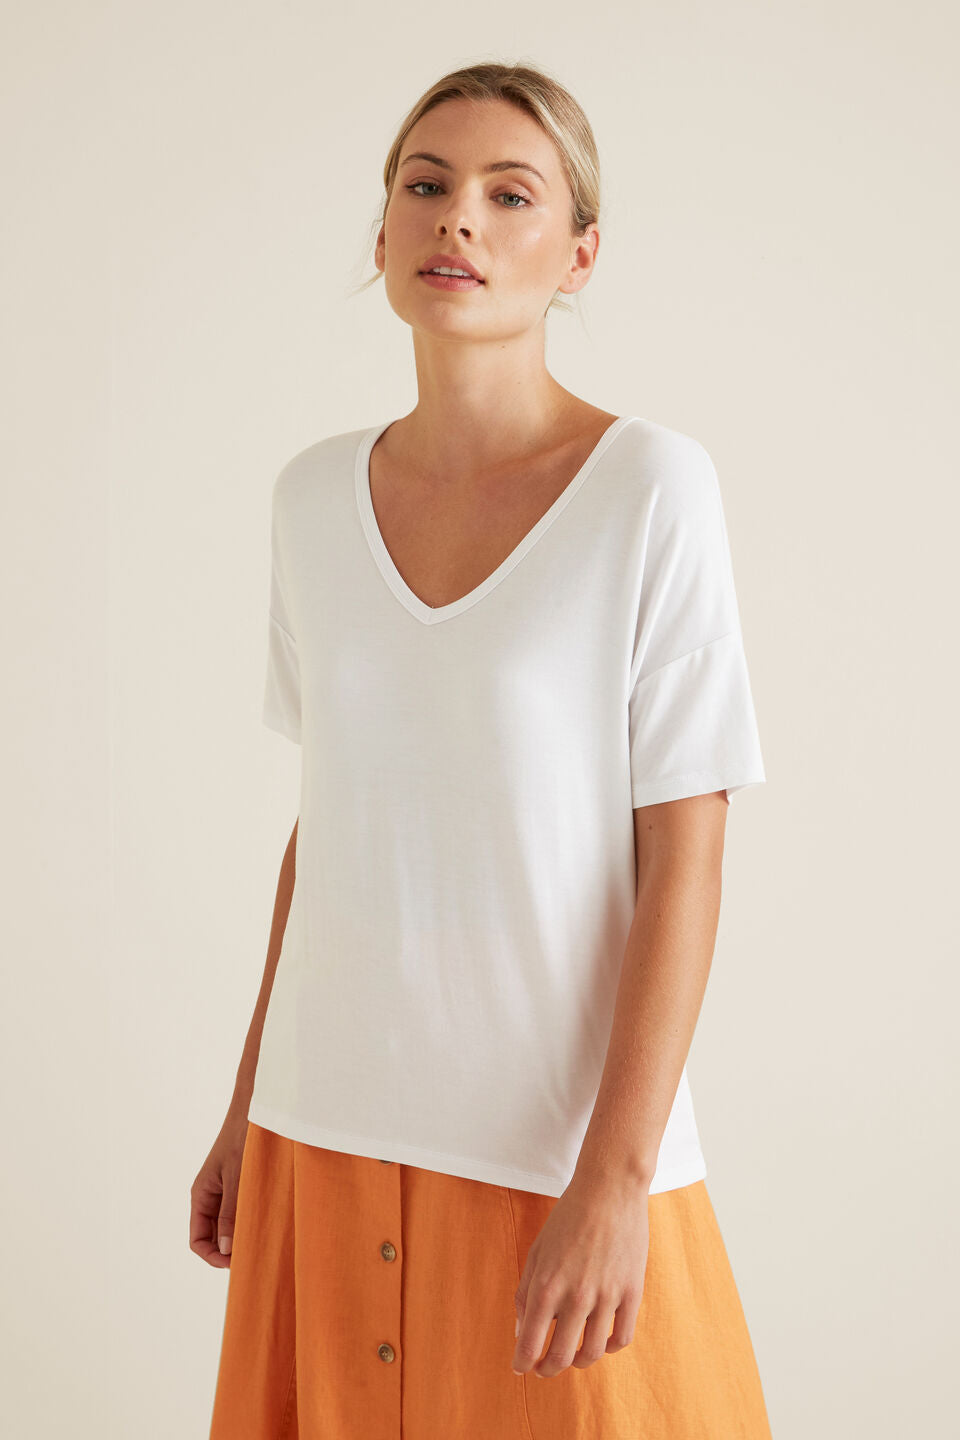 White Relaxed Fit T-shirt